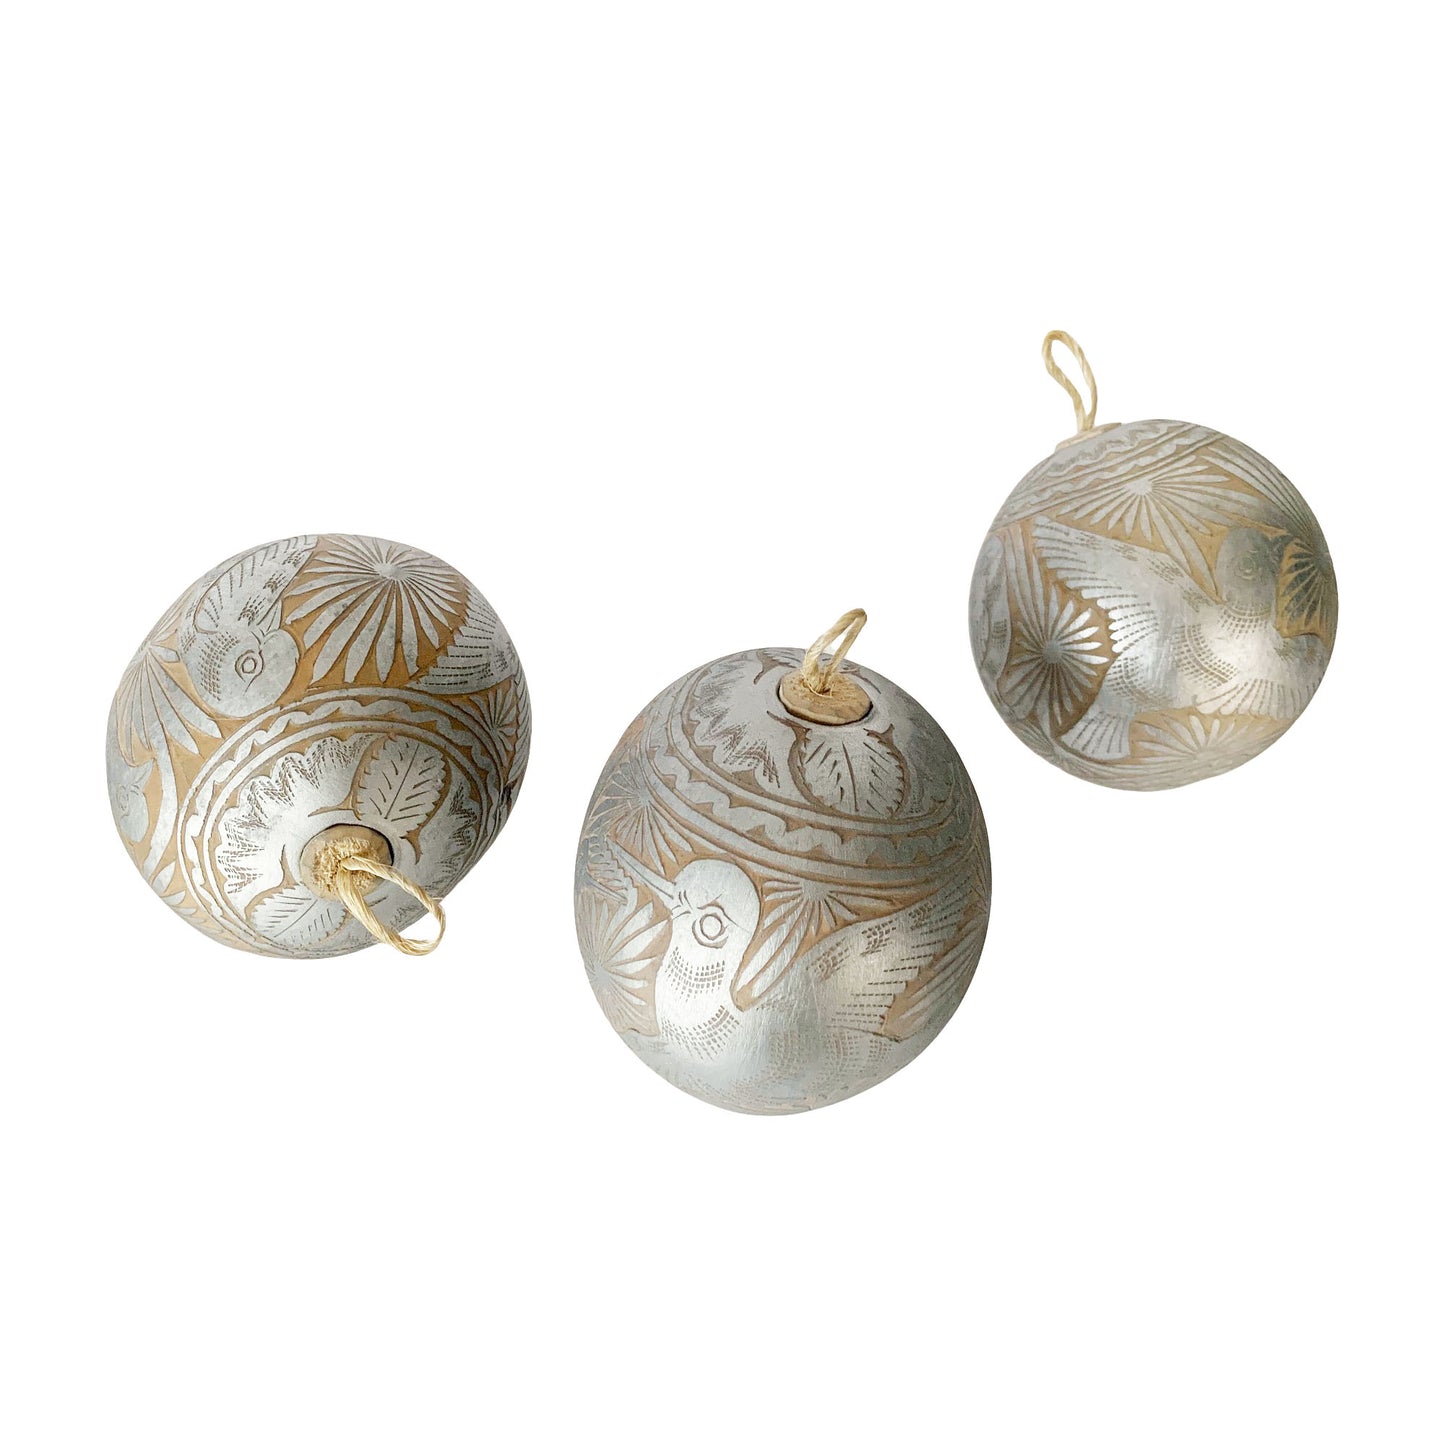 Hand Carved Jicara Gourd Ornaments from Mexico in Silver, White and Gold